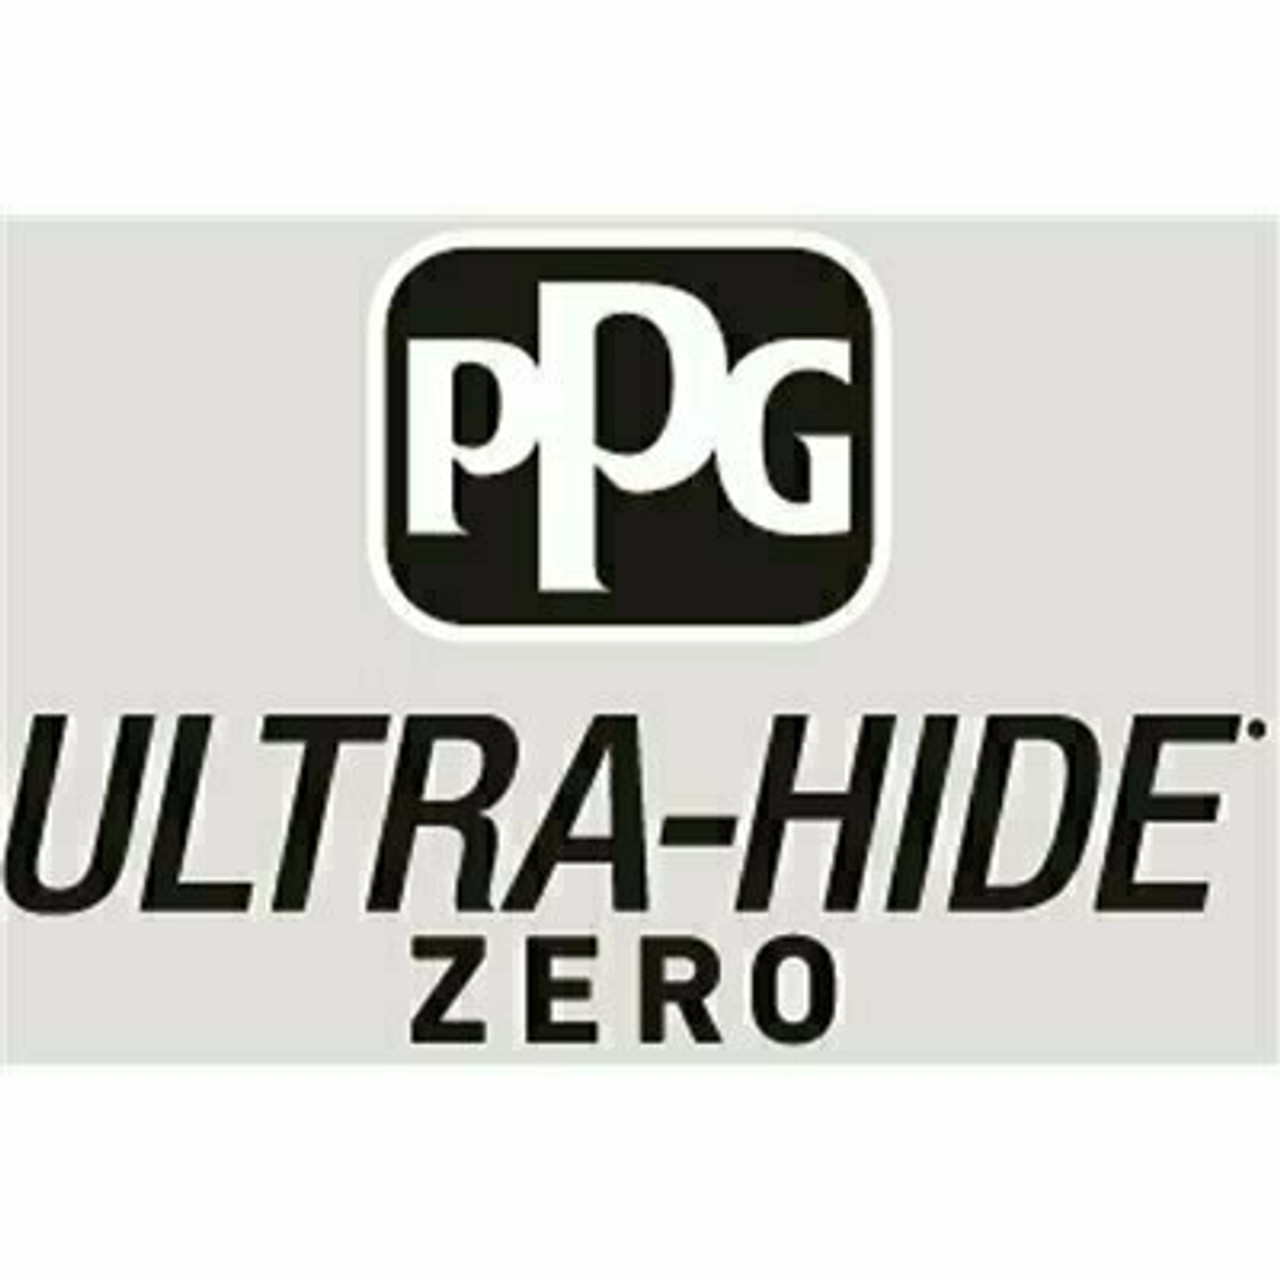 Ppg Ultra-Hide Zero 1 Gal. #Ppg1001-3 Thin Ice Satin Interior Paint